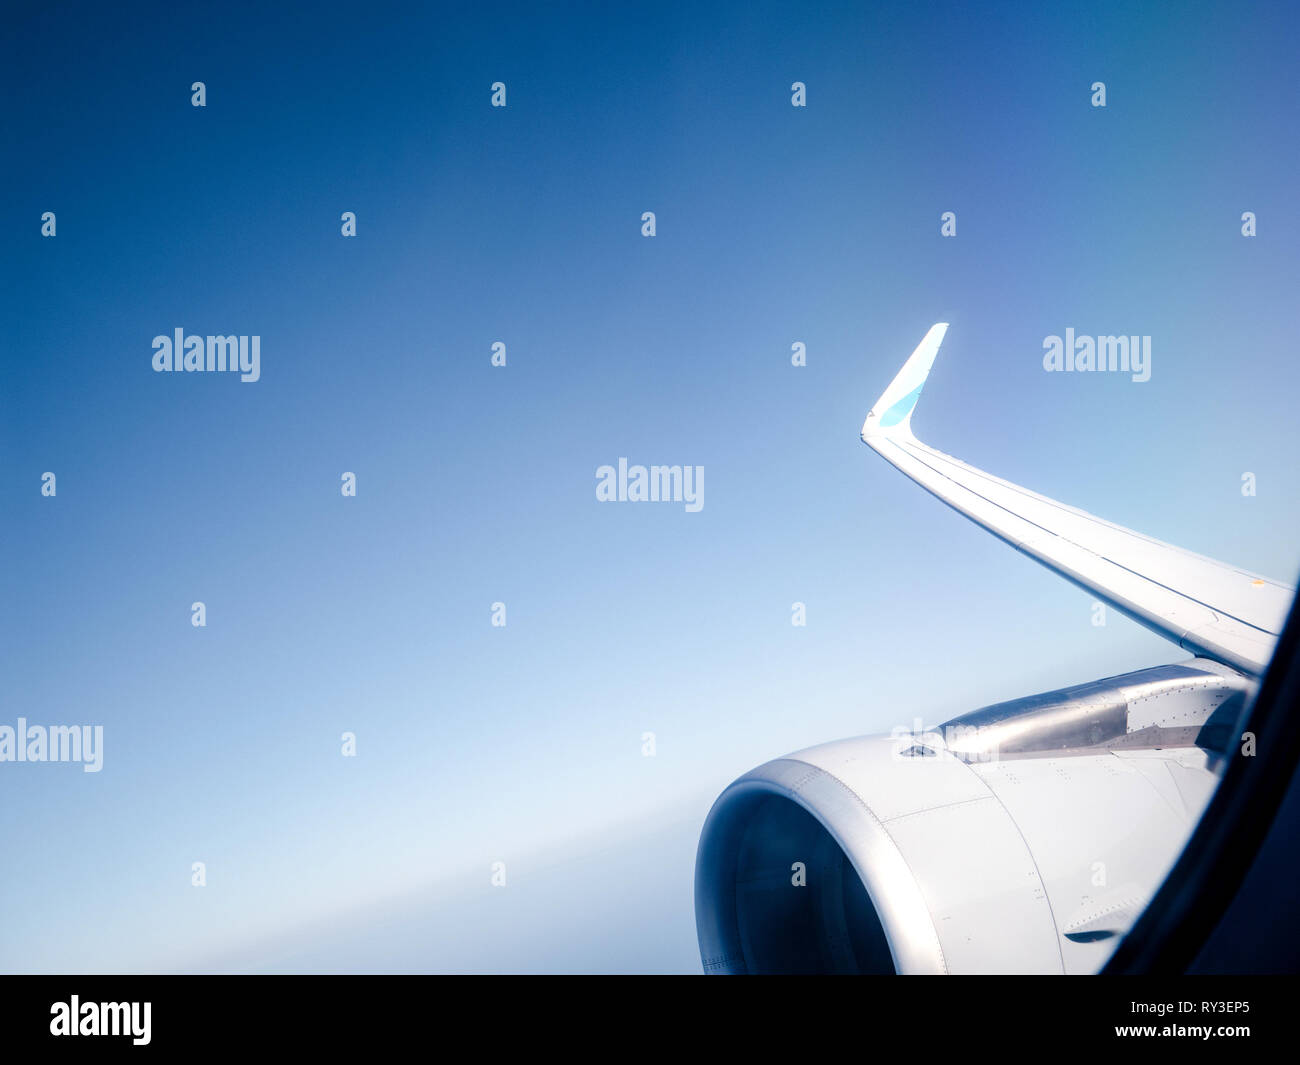 View from window of plane turbine in flight high above clouds high altitude travel security safety flight Stock Photo